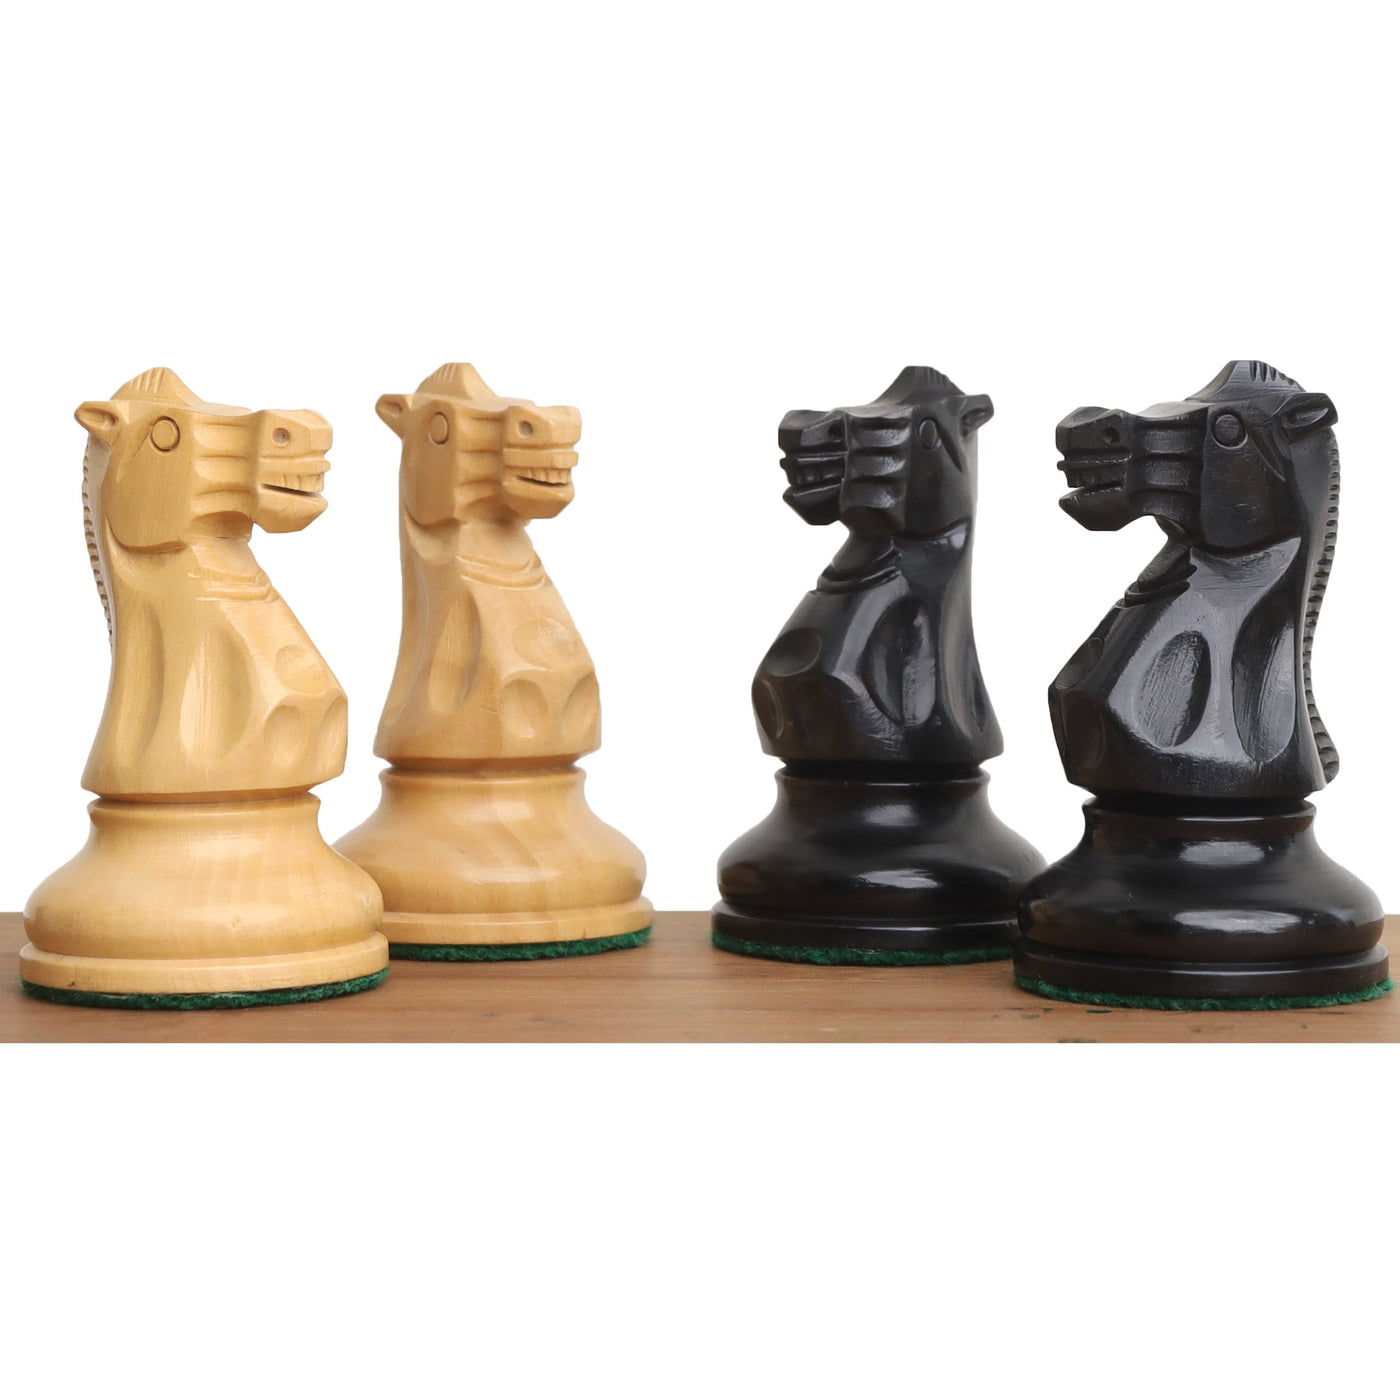 4.1" New Classic Staunton Wooden Chess Pieces Only Set-Weighted Ebonised Boxwood